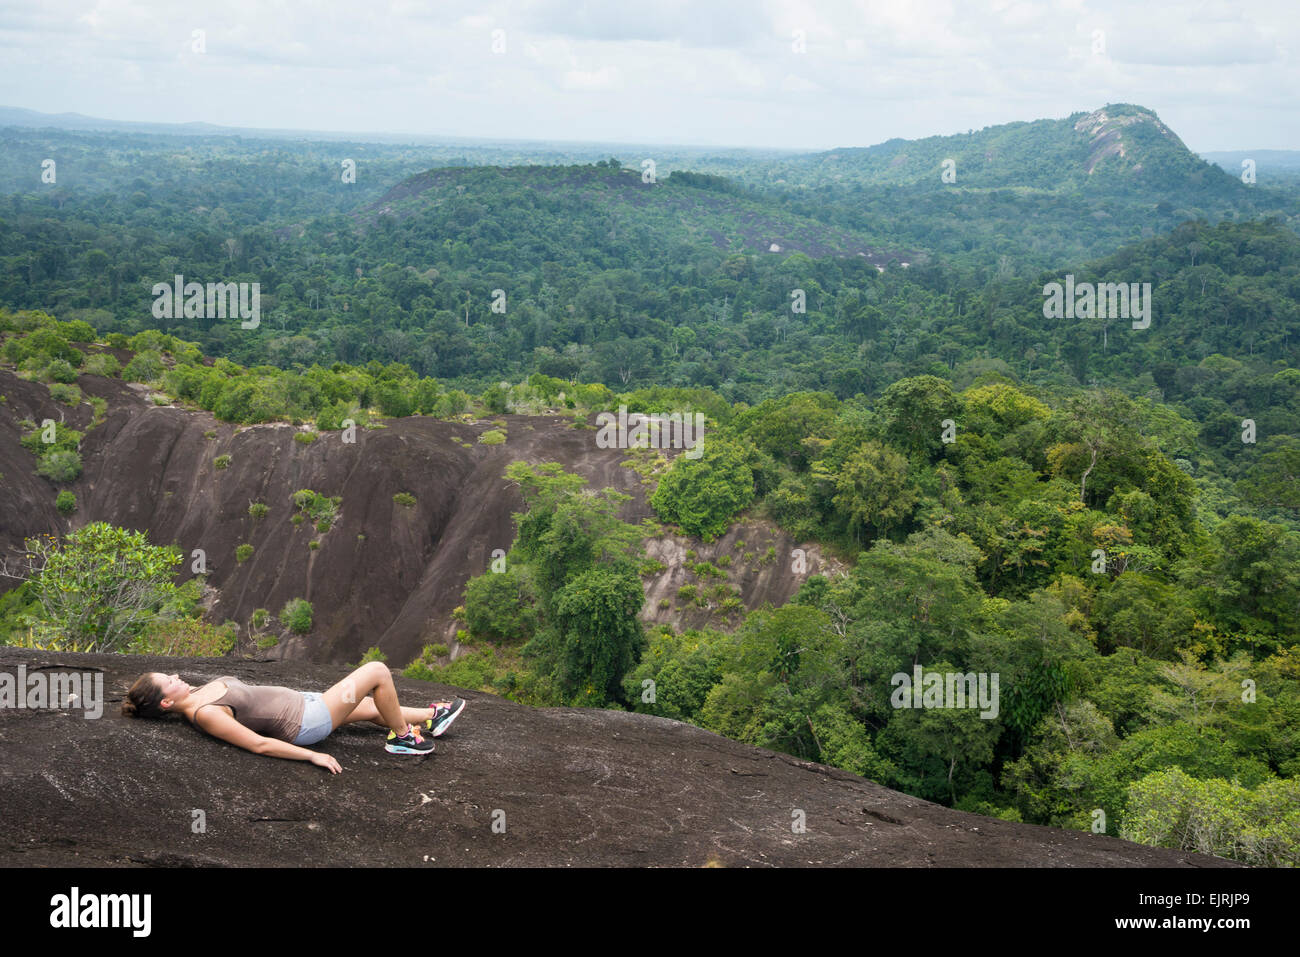 Hiker on Voltzberg Mountain, Central Suriname Nature Reserve Stock Photo -  Alamy